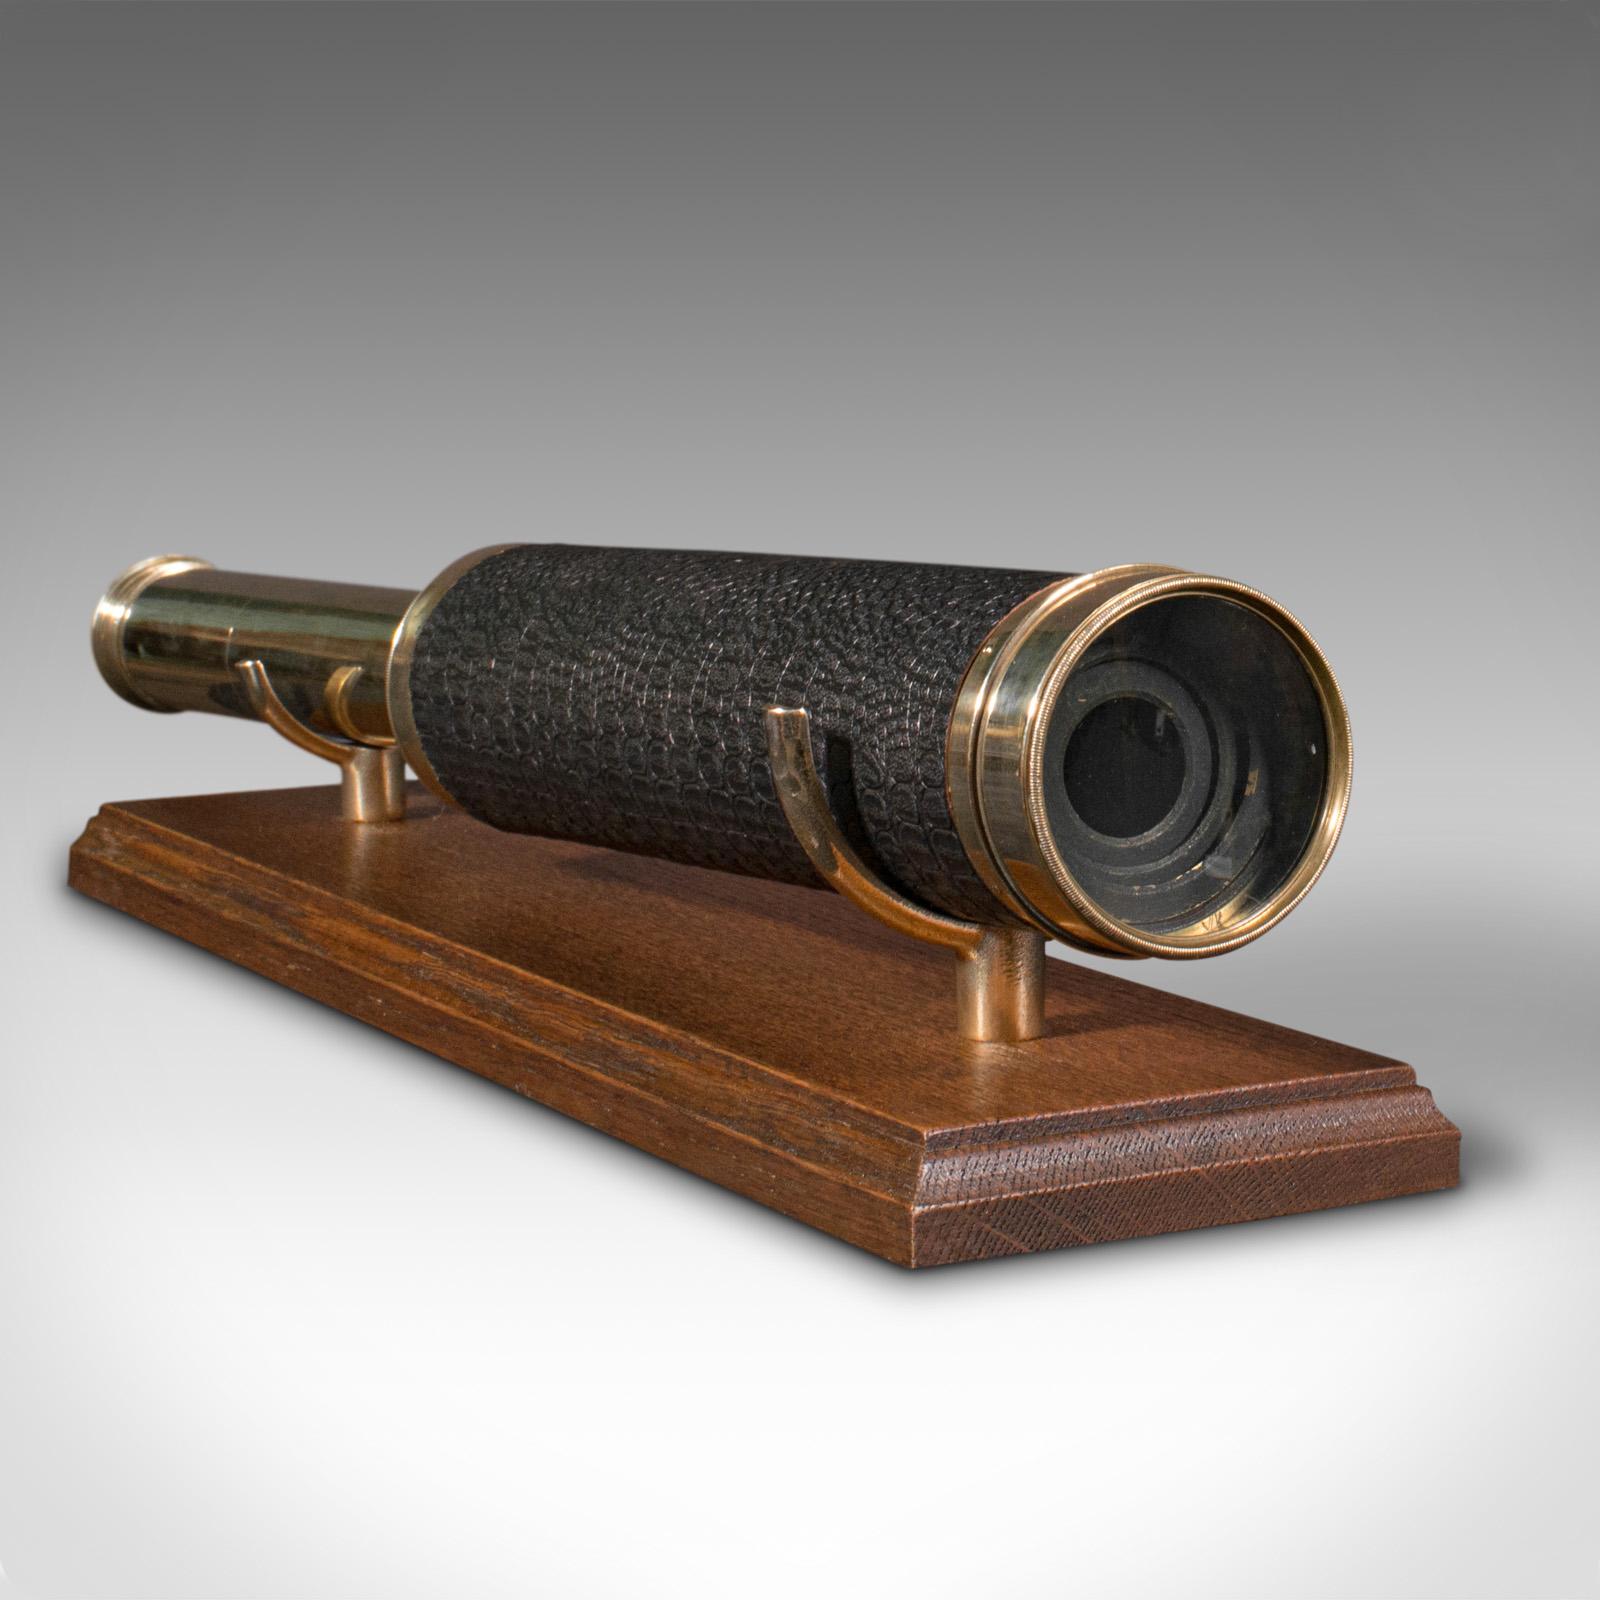 19th Century Antique 4 Draw Telescope, English, Terrestrial, Astronomical, Dollond, Victorian